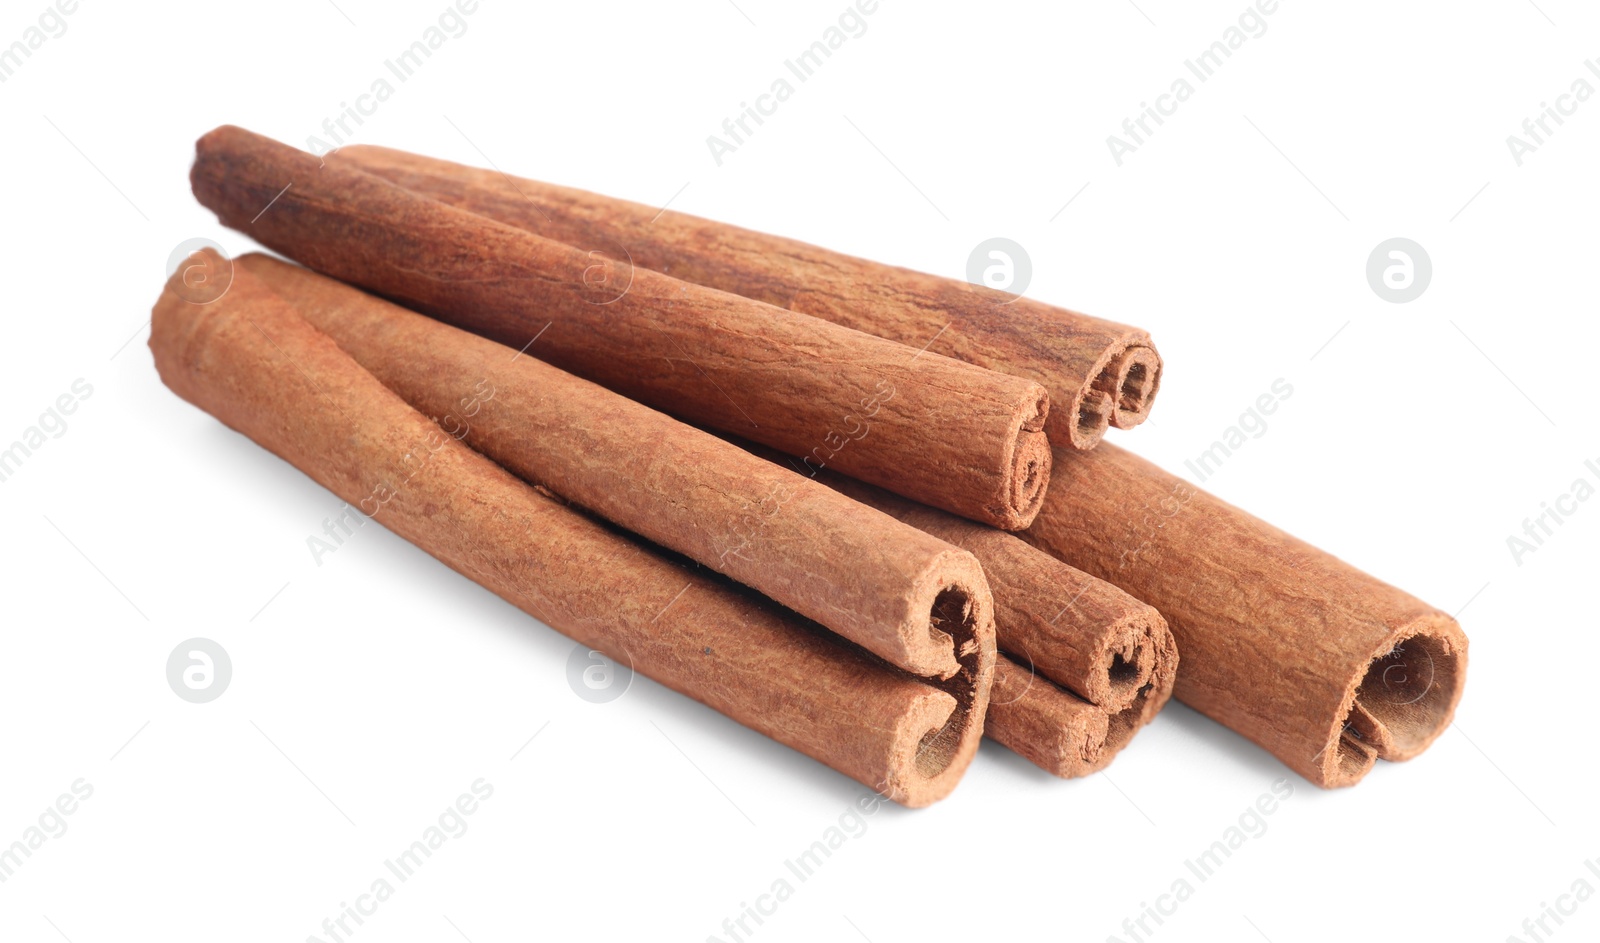 Photo of Dry aromatic cinnamon sticks isolated on white